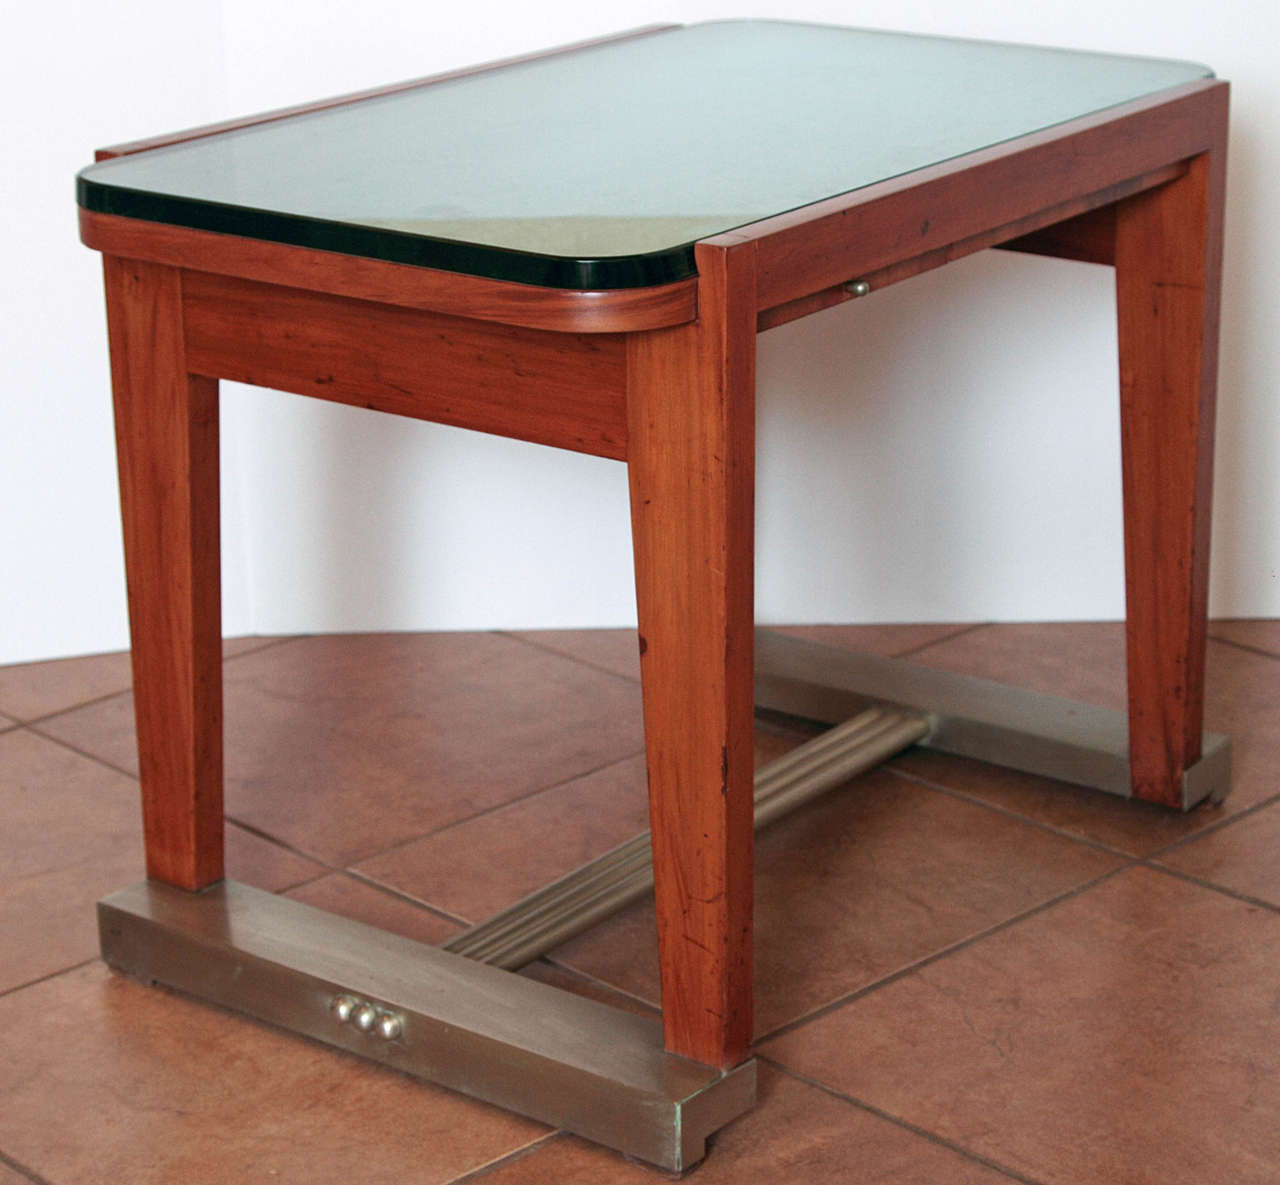 French Art Deco or Machine Age Drinks Serving Table In Good Condition For Sale In Dallas, TX